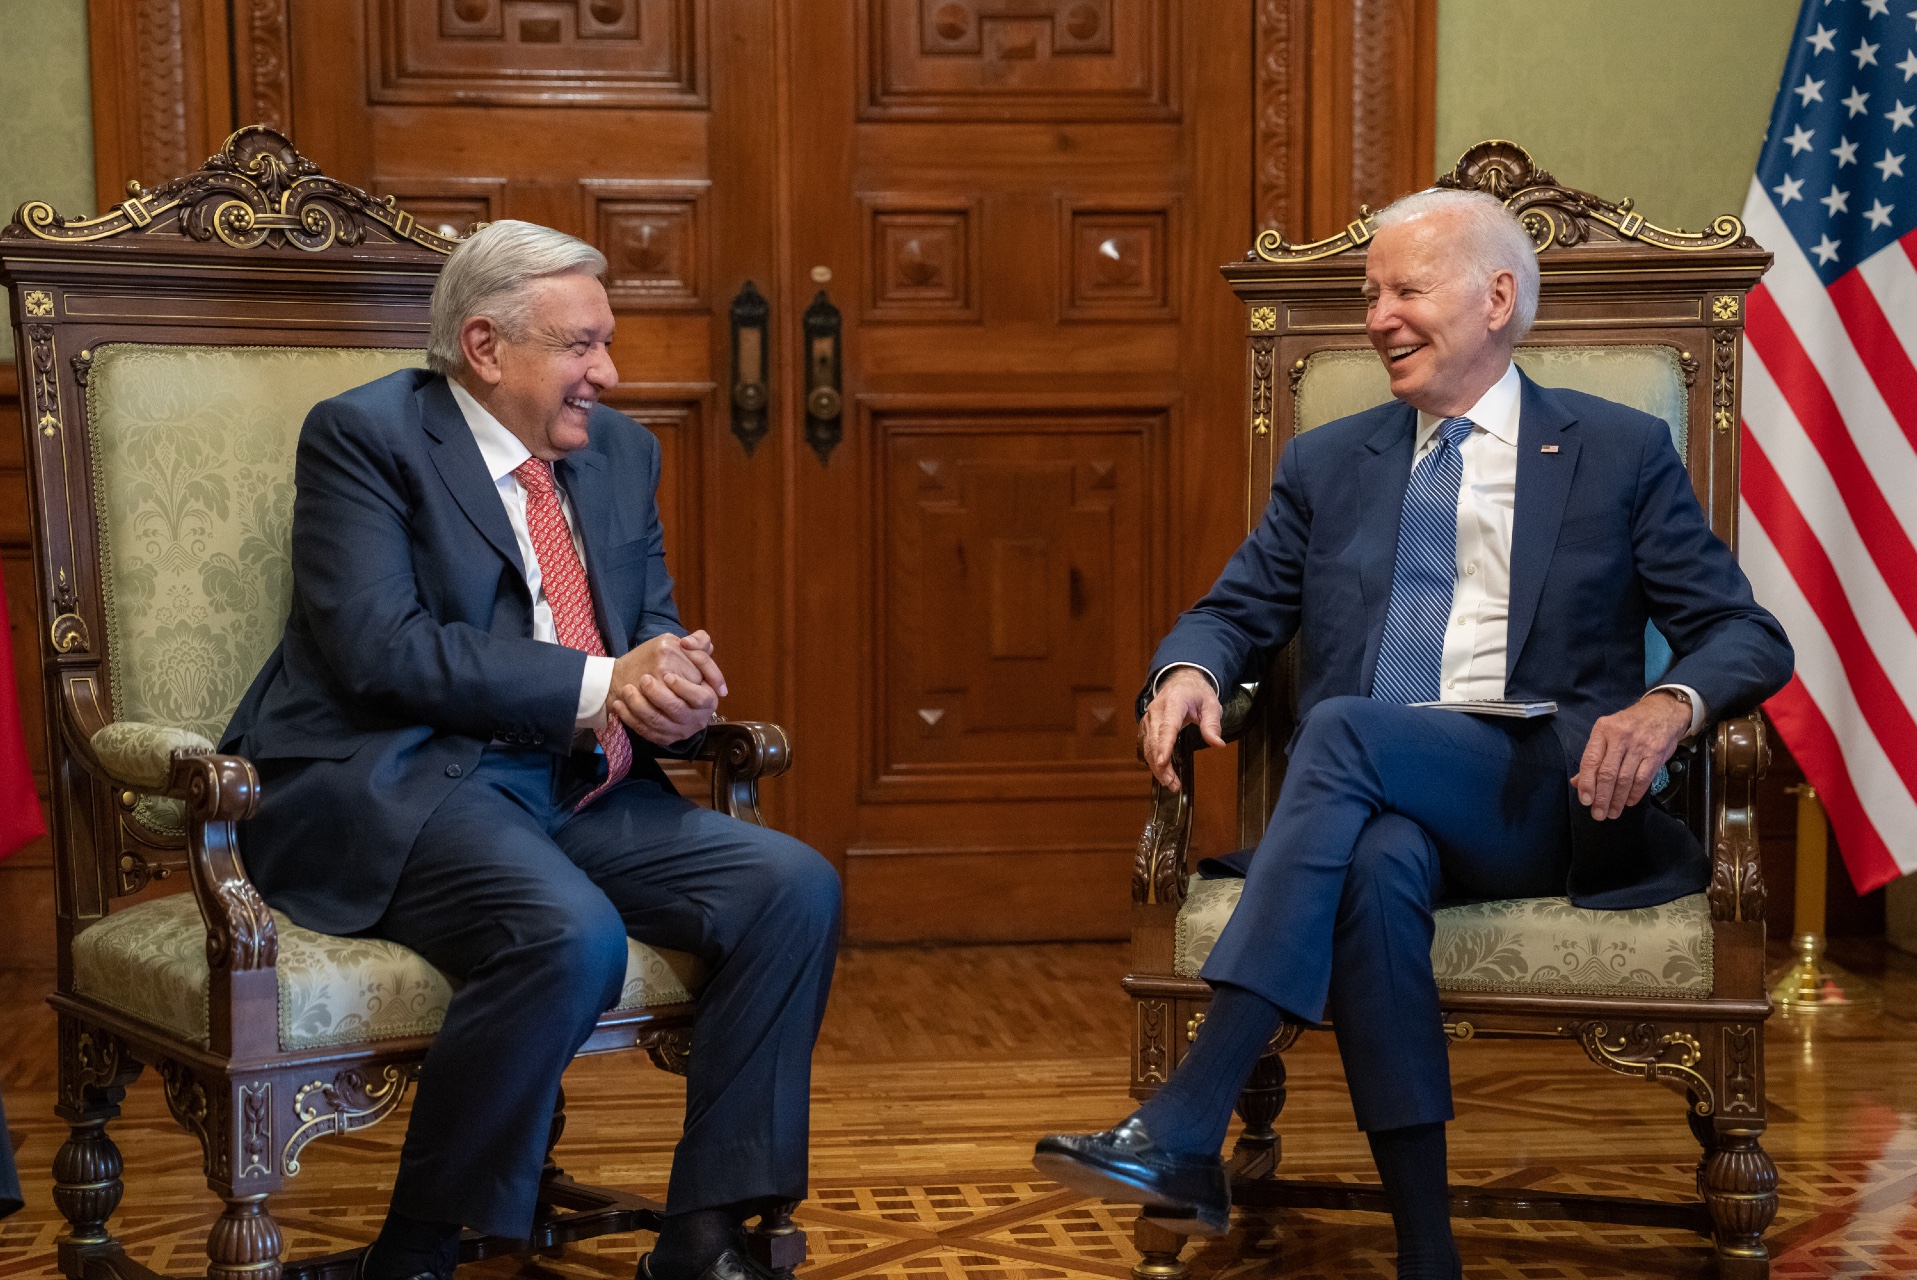 President Joe Biden has a one-on-one private meeting with Mexican President Andres Manuel Lopez Obrado